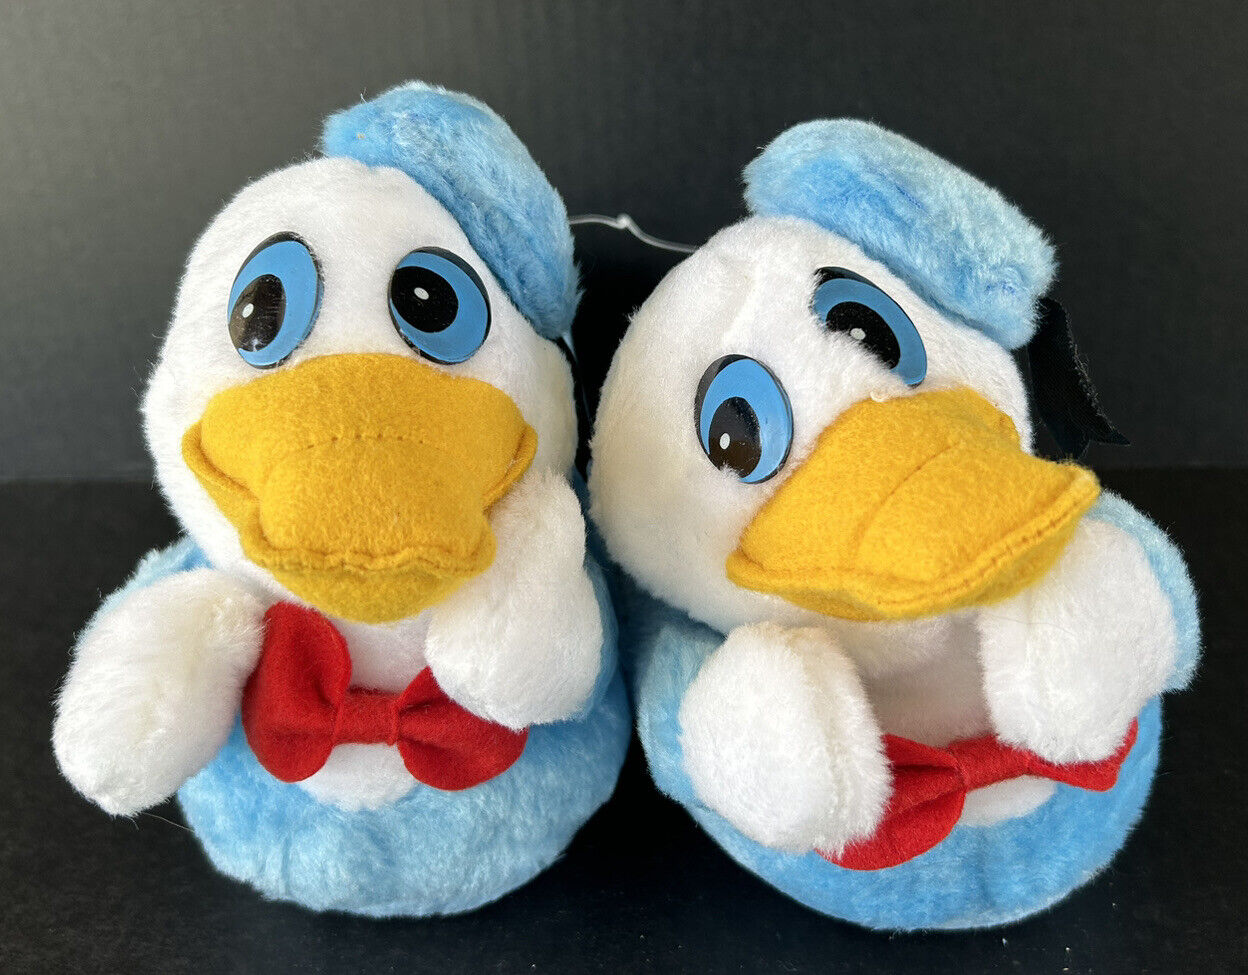 Vintage Disney Donald Duck Slippers Size 2-3 Made Taiwan New Never Worn